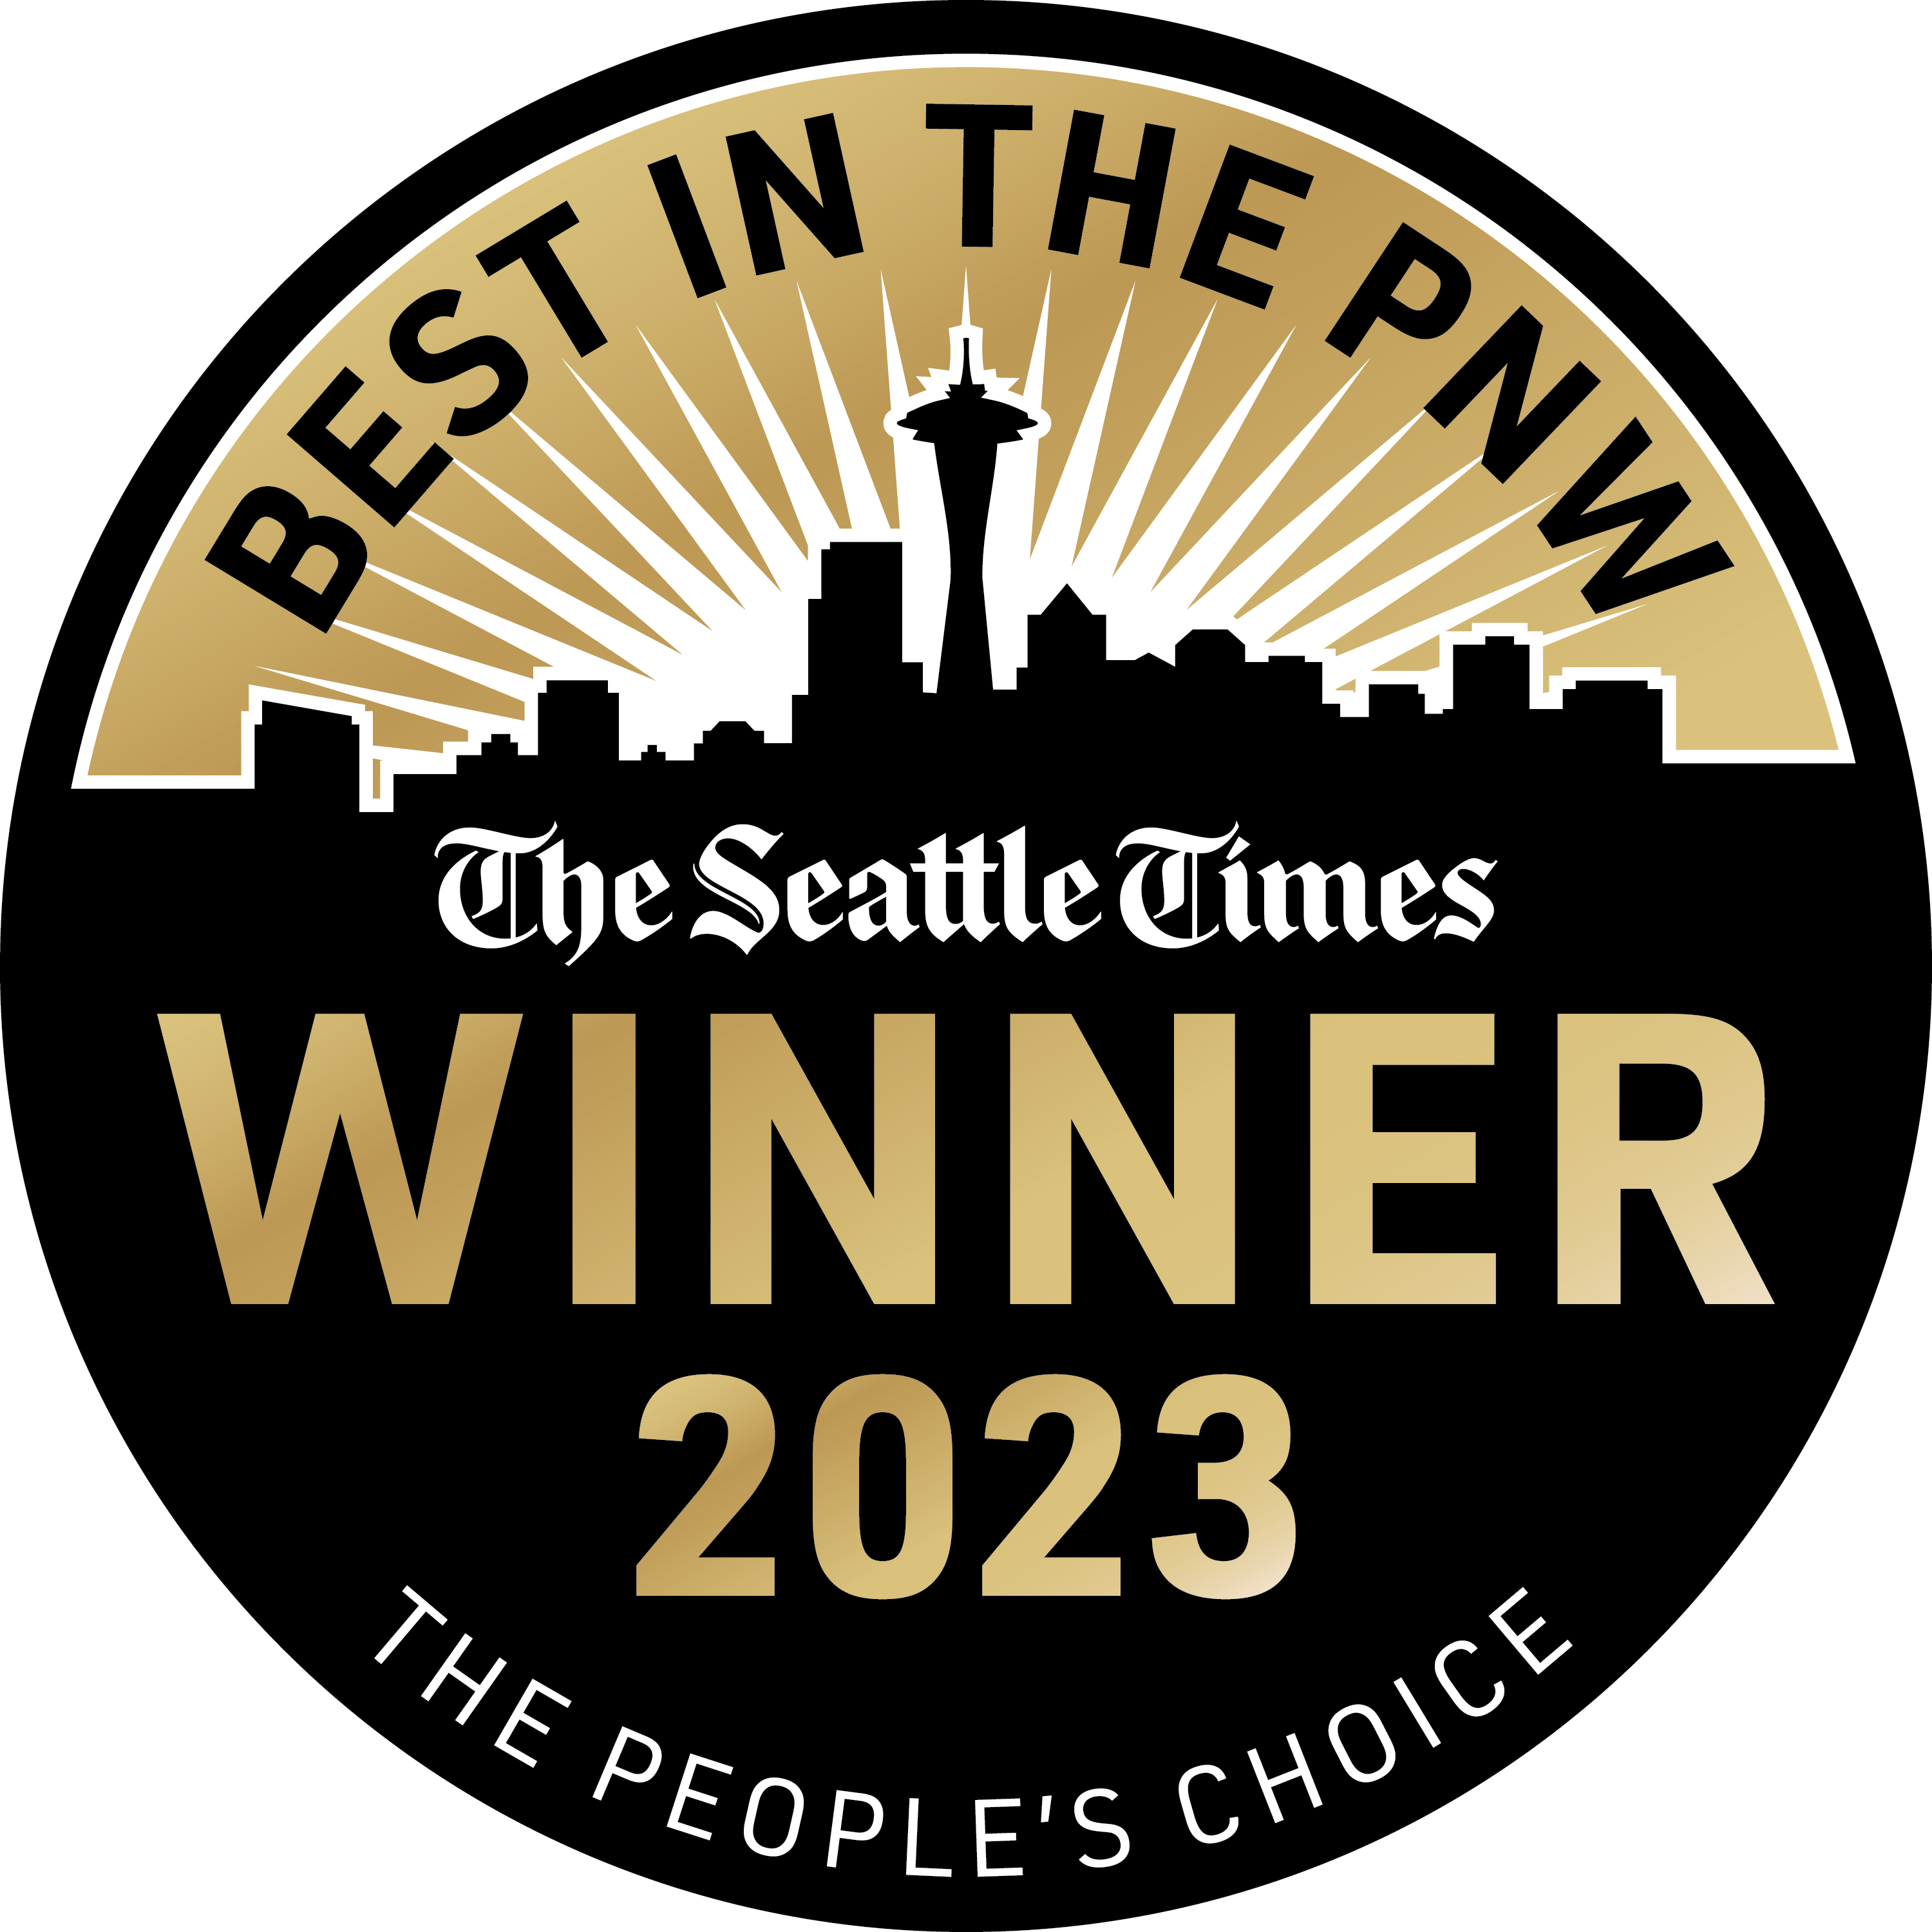 Primary care | Best in the PNW award